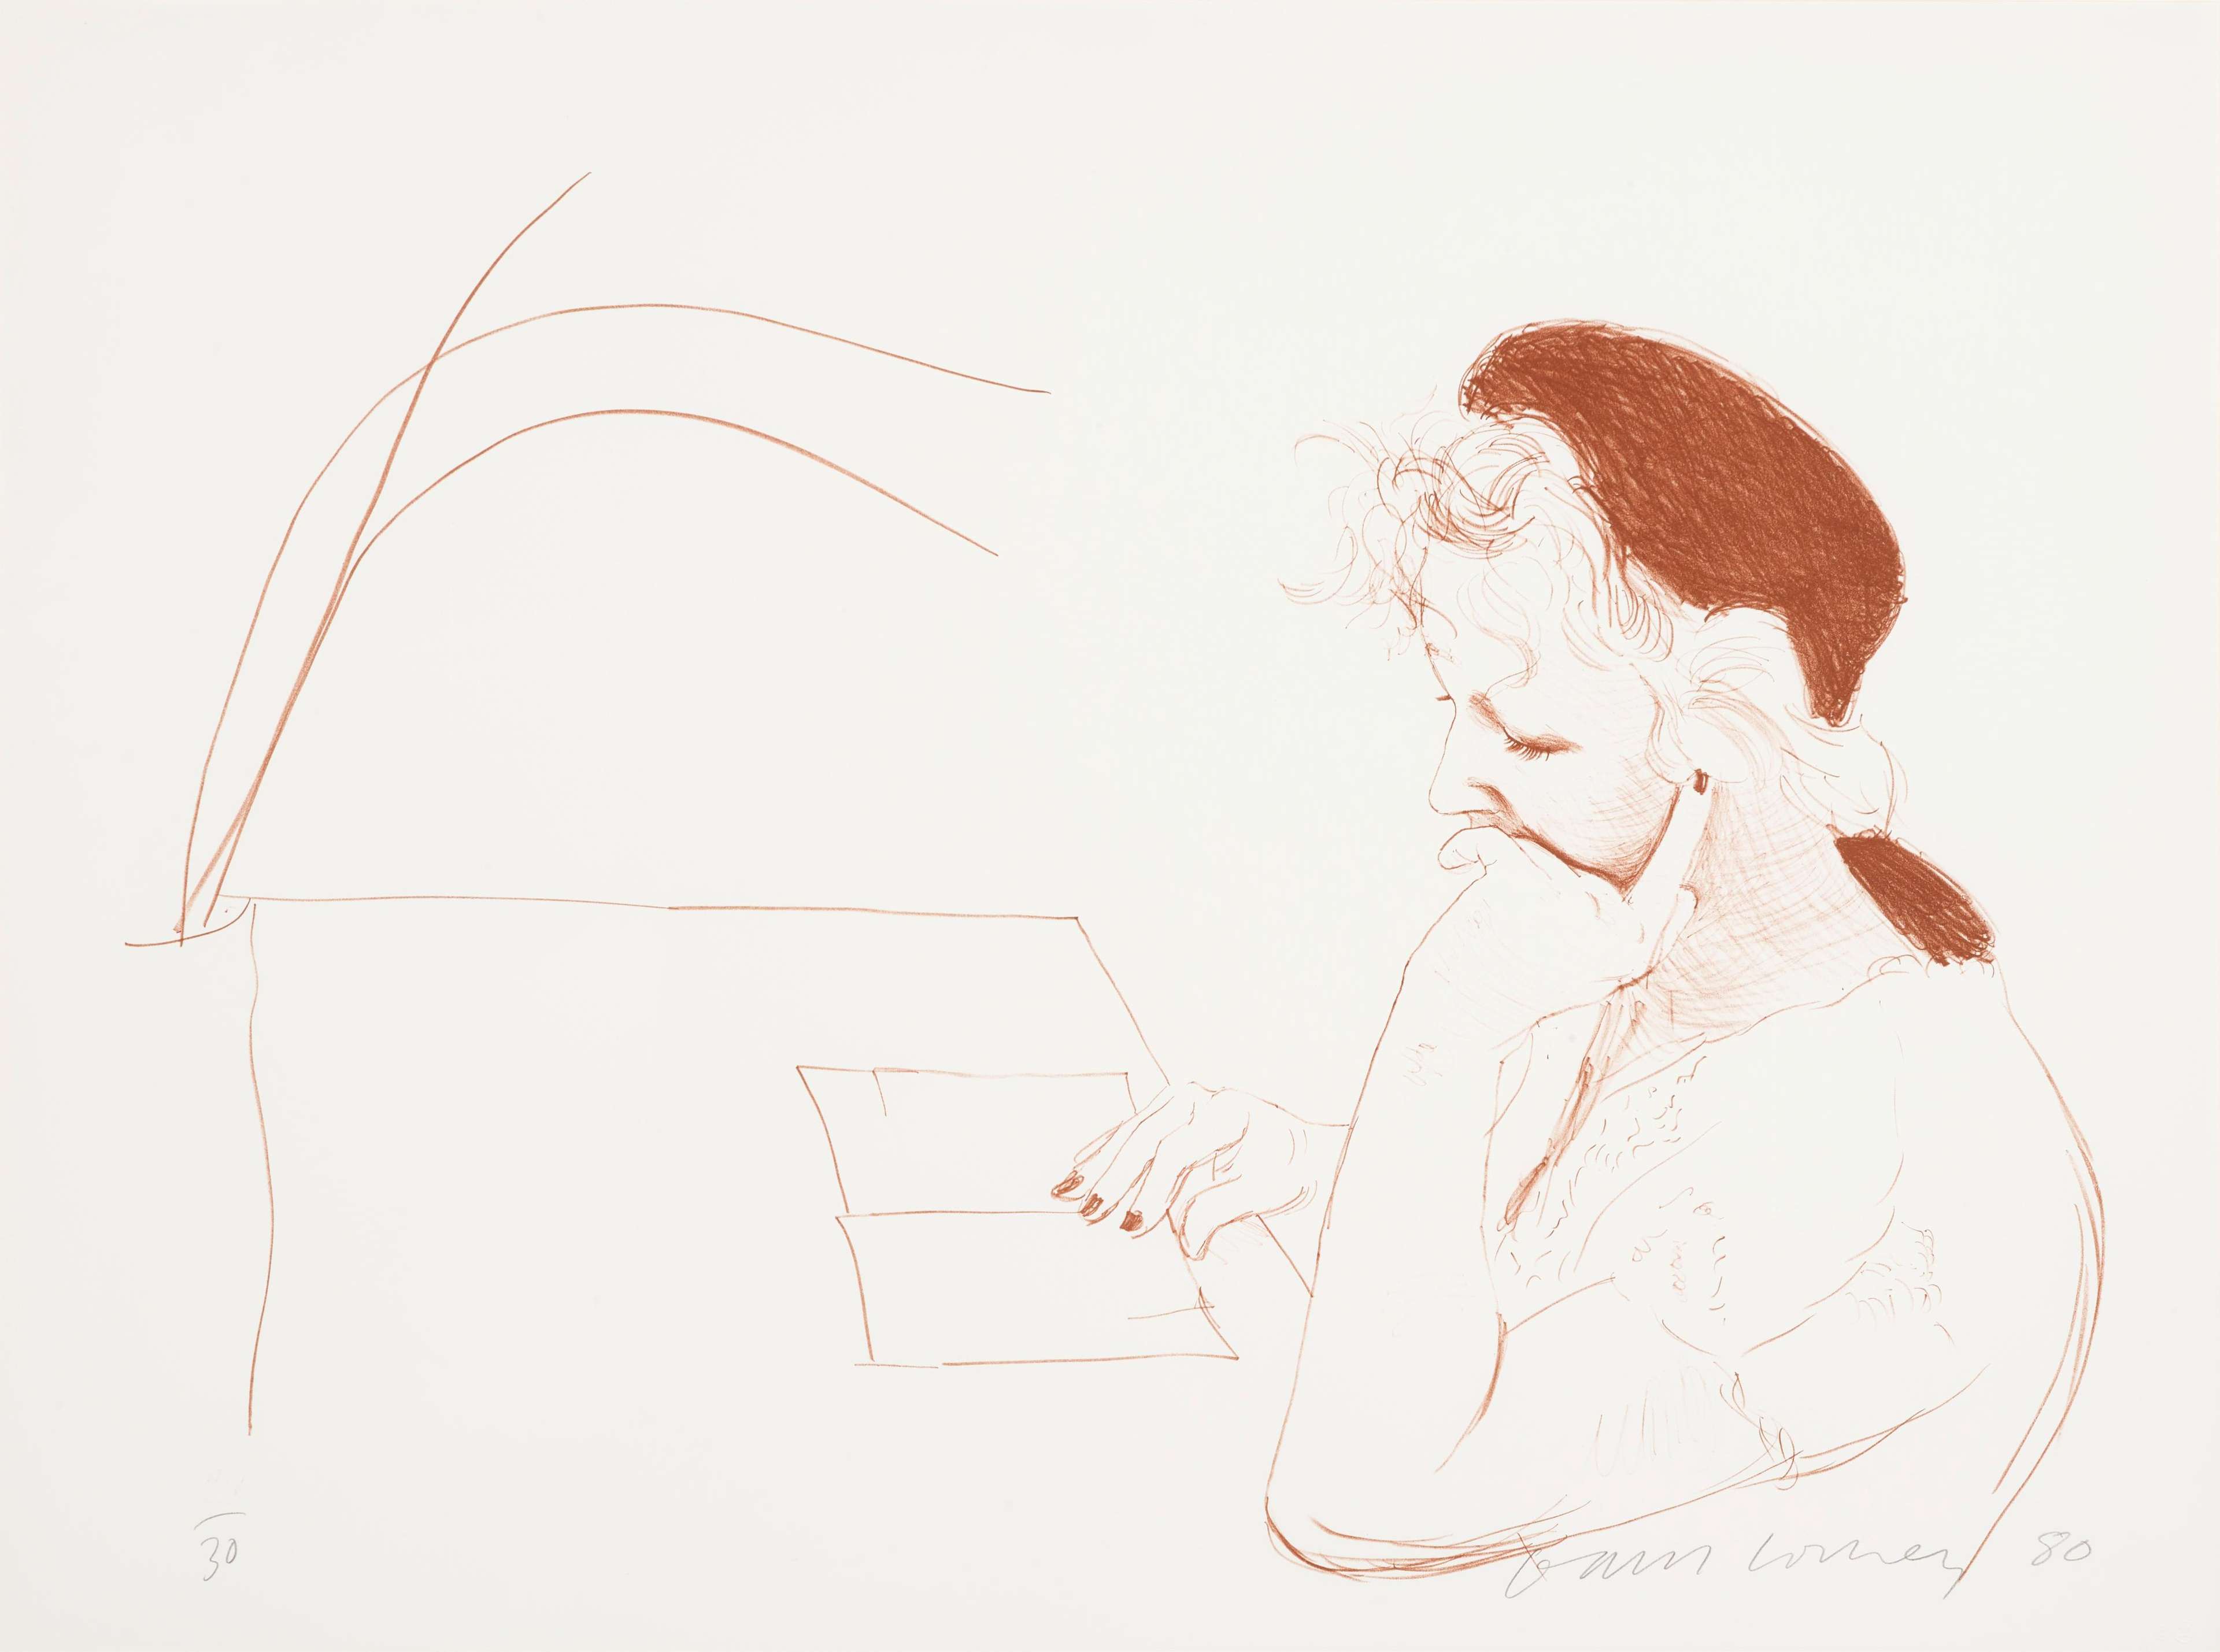 The work depicts Celia Birtwell who became the icon of Hockney’s portraits in the 1980s, featuring in over thirty of his prints. Exploring the intimacy of the domestic scene, the work portrays the woman as she is hunched over the desk, immersed in the act of reading.